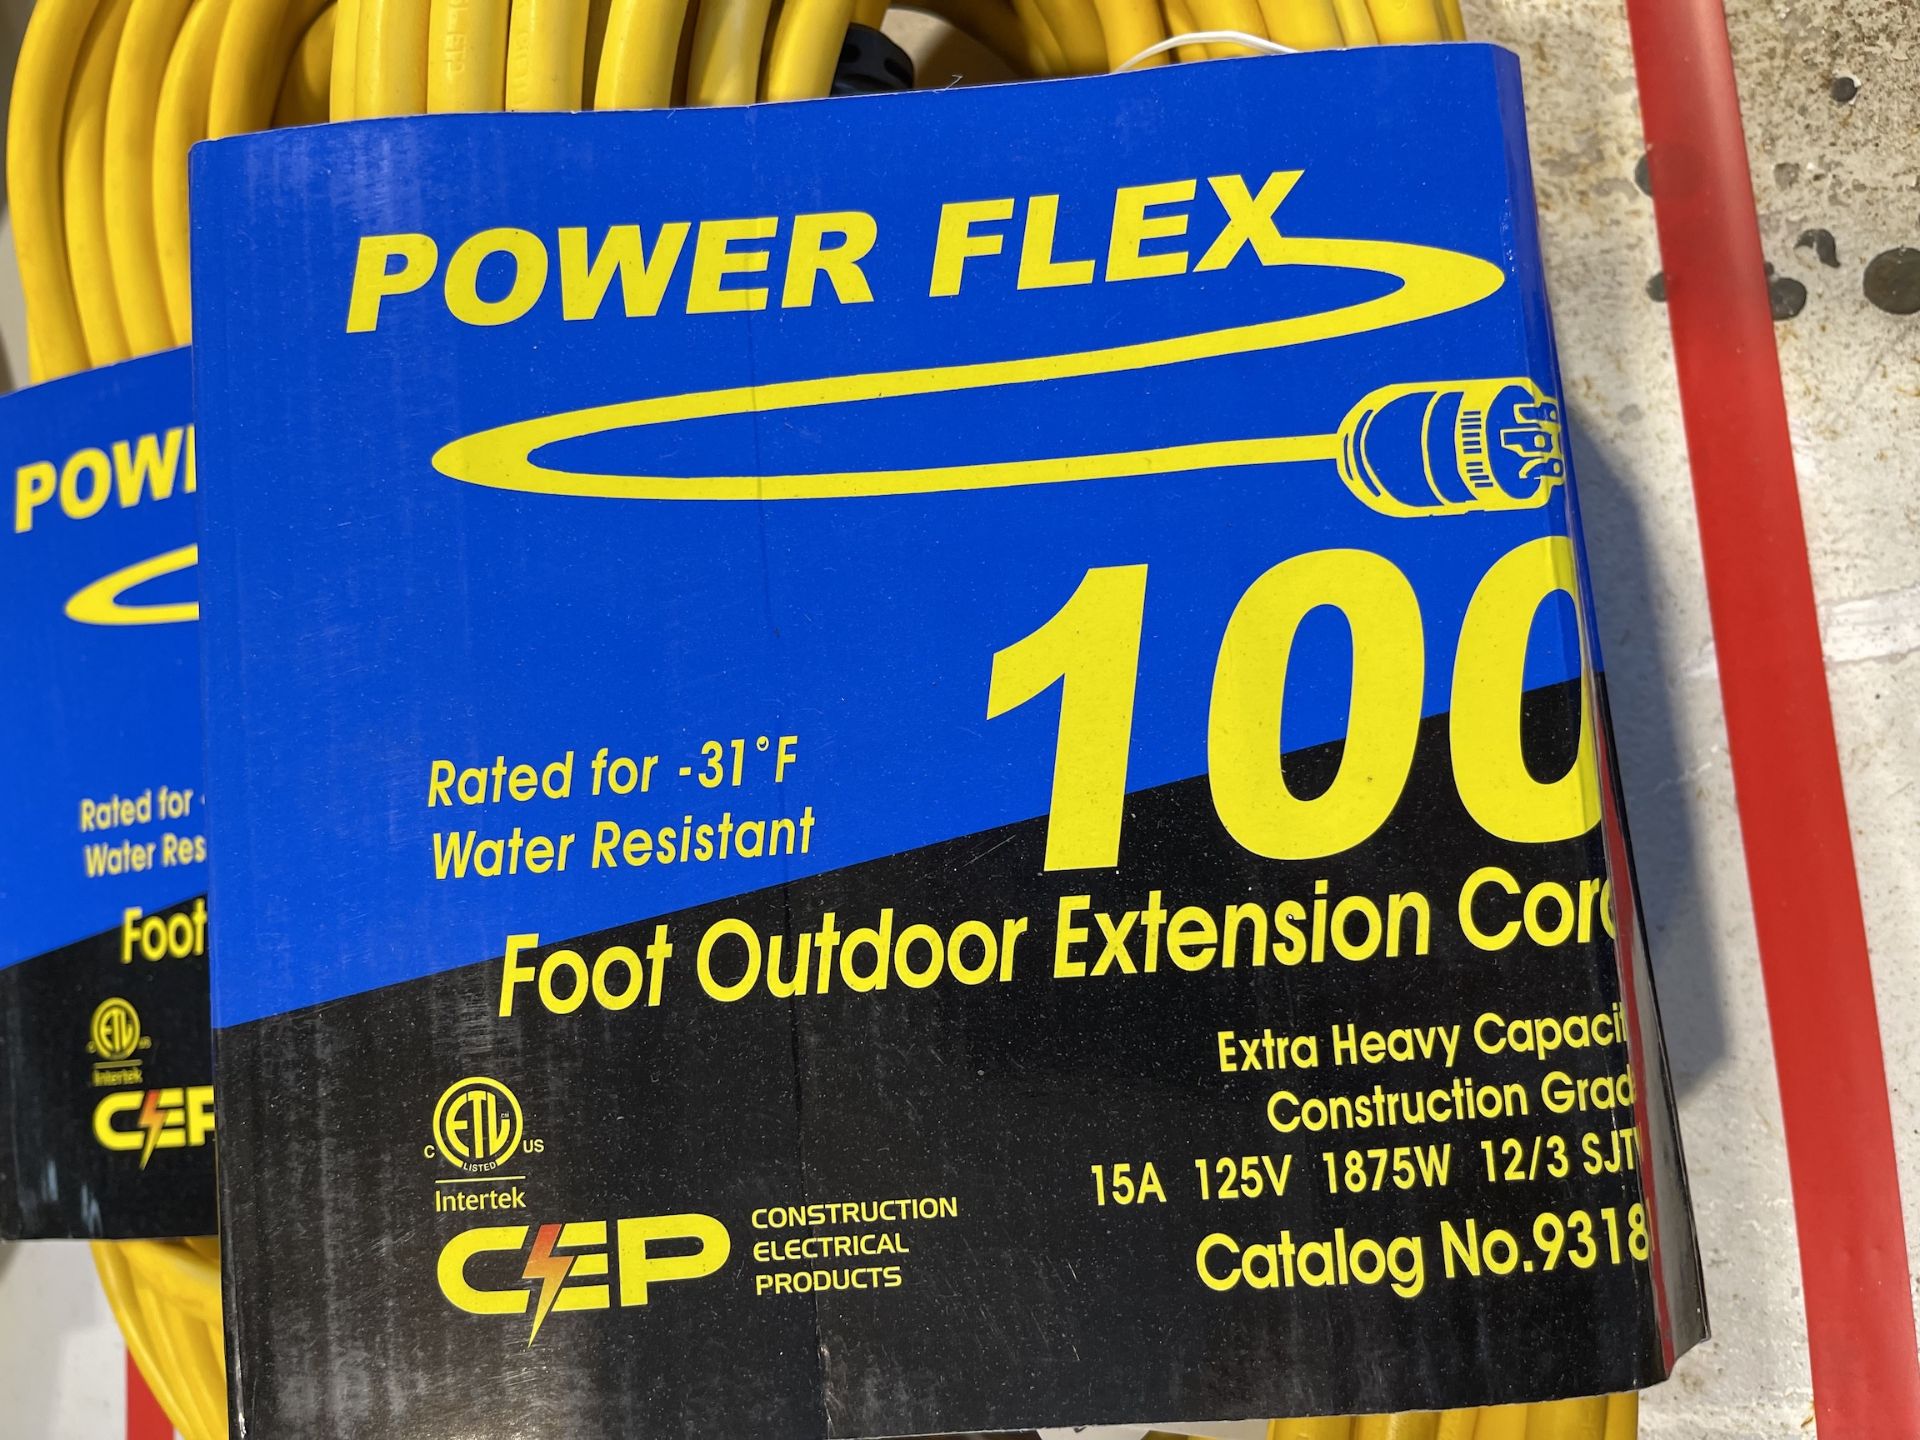 Lot of 4 100ft Outdoor Extension Cords - Upland - Image 2 of 4